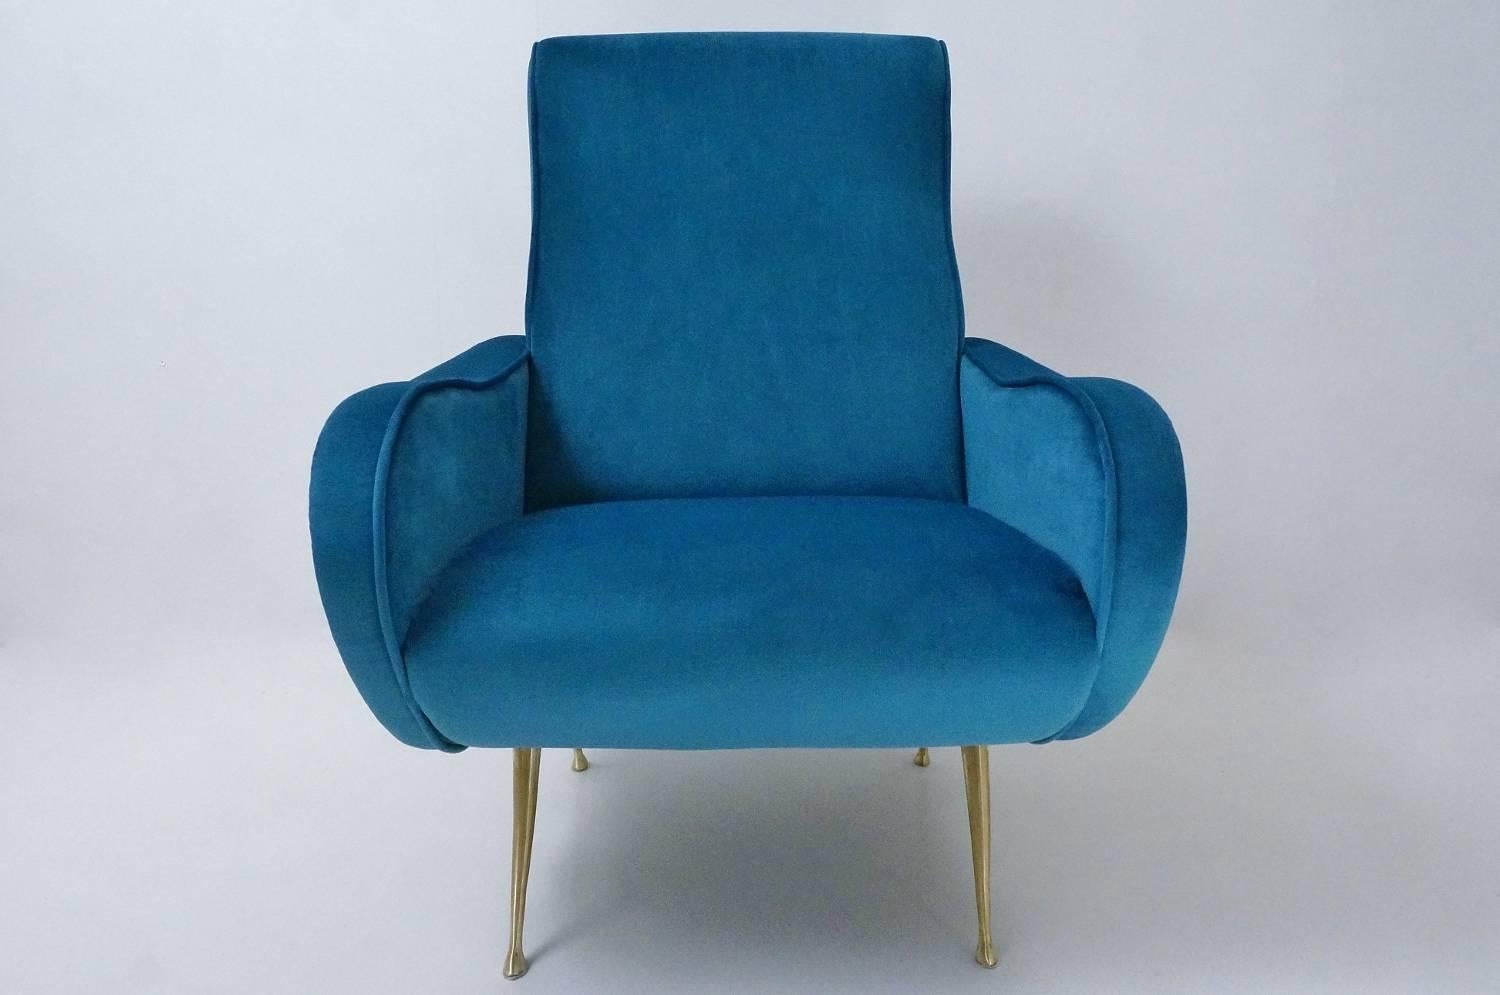 Contemporary 1950s Style Armchair Newly Made to Order in 25 Colors,  Italian For Sale